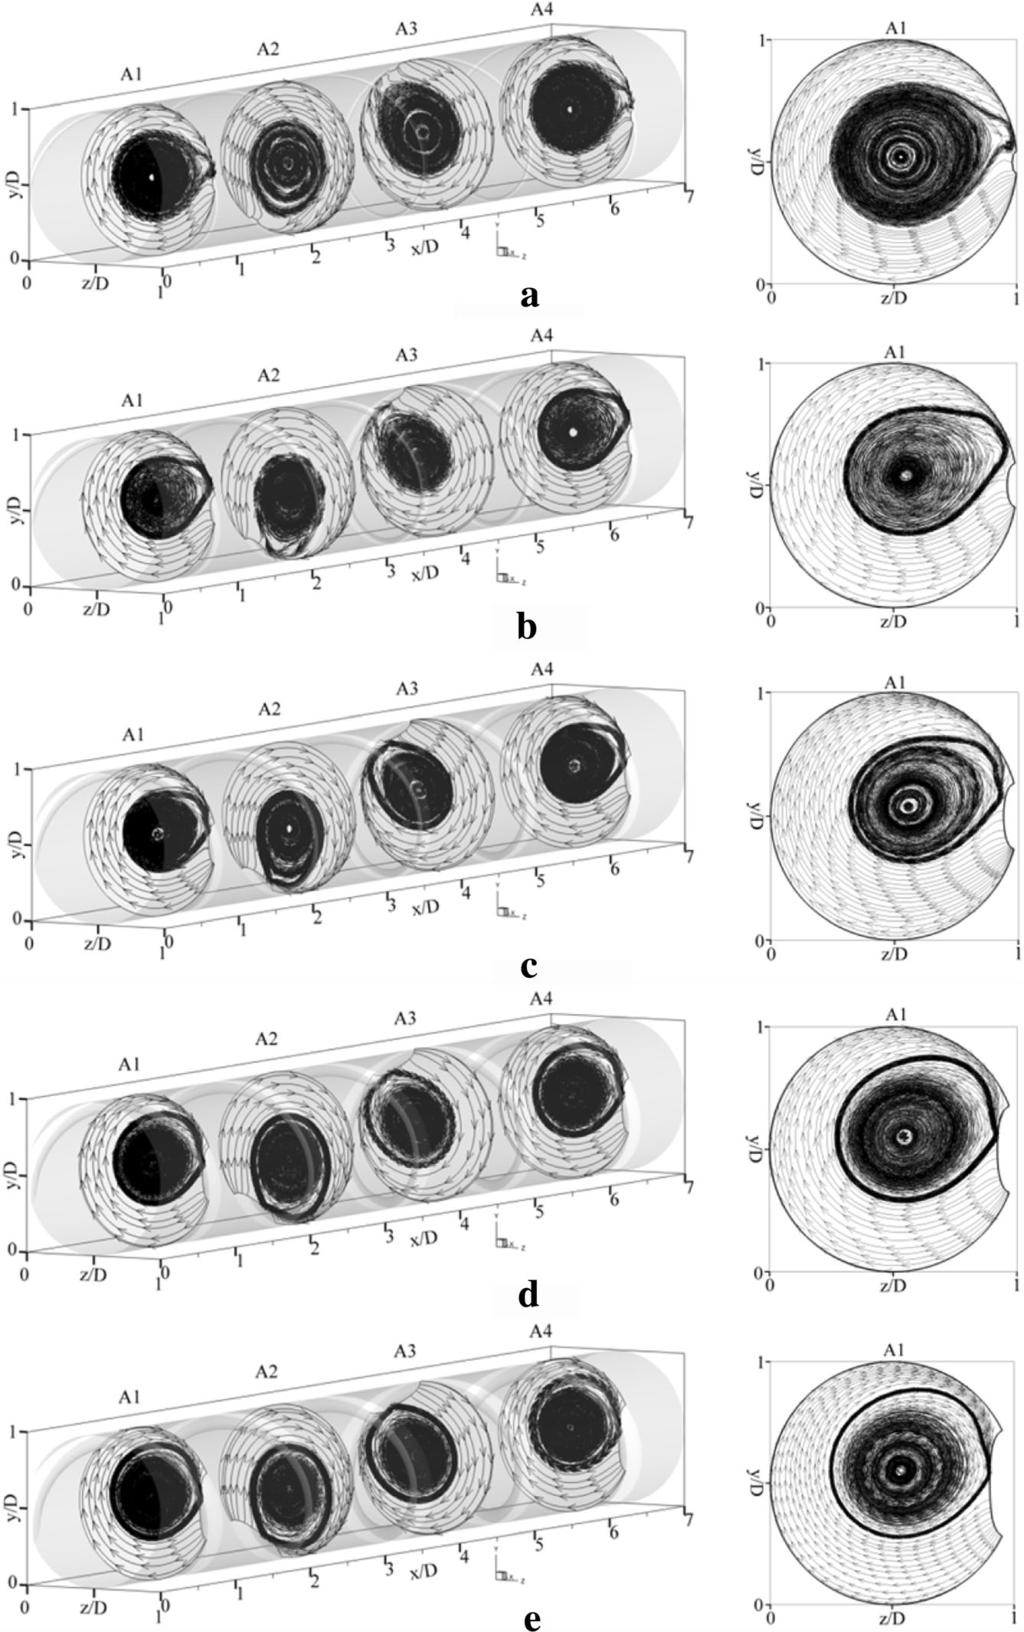 Promthaisong et al. International Journal of Mechanical and Materials Engineering (2016) 11:9 Page 6 of 15 cases of the computational domain for the spirally semicircle-grooved tube.